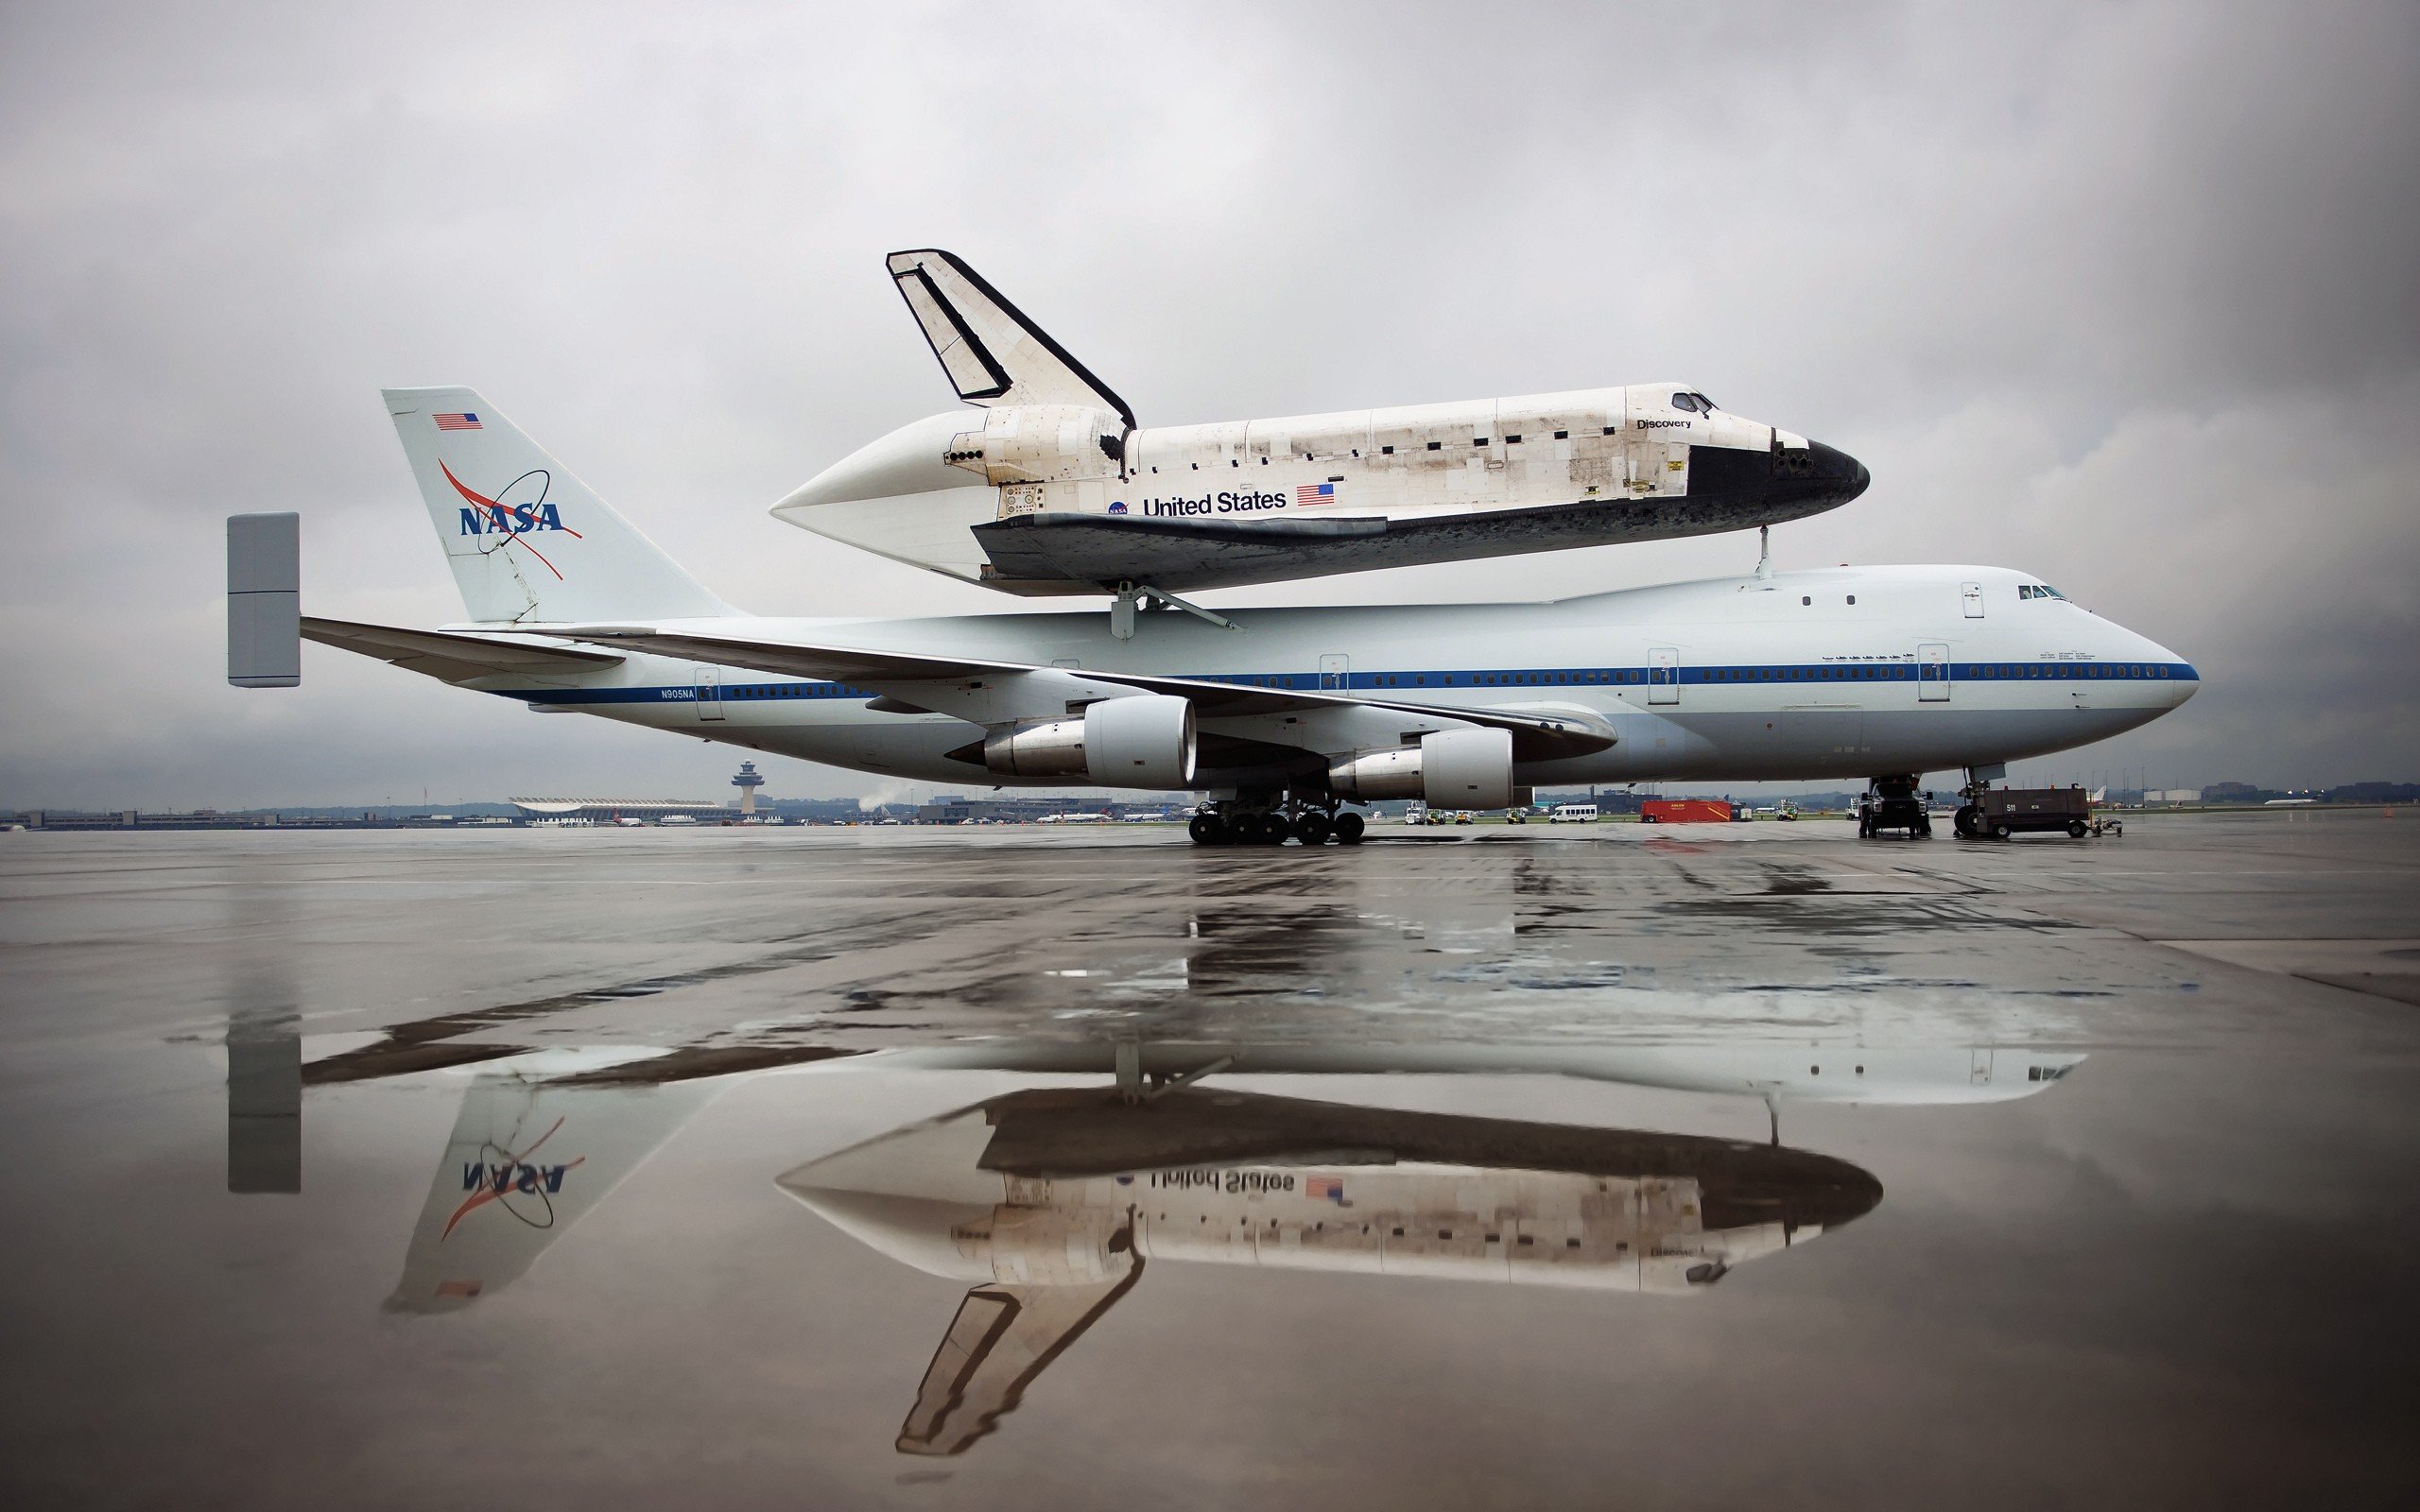 boeing, 747, Airliner, Aircraft, Plane, Airplane, Boeing 747, Transport, Space, Shuttle, Nasa, Gd Wallpaper